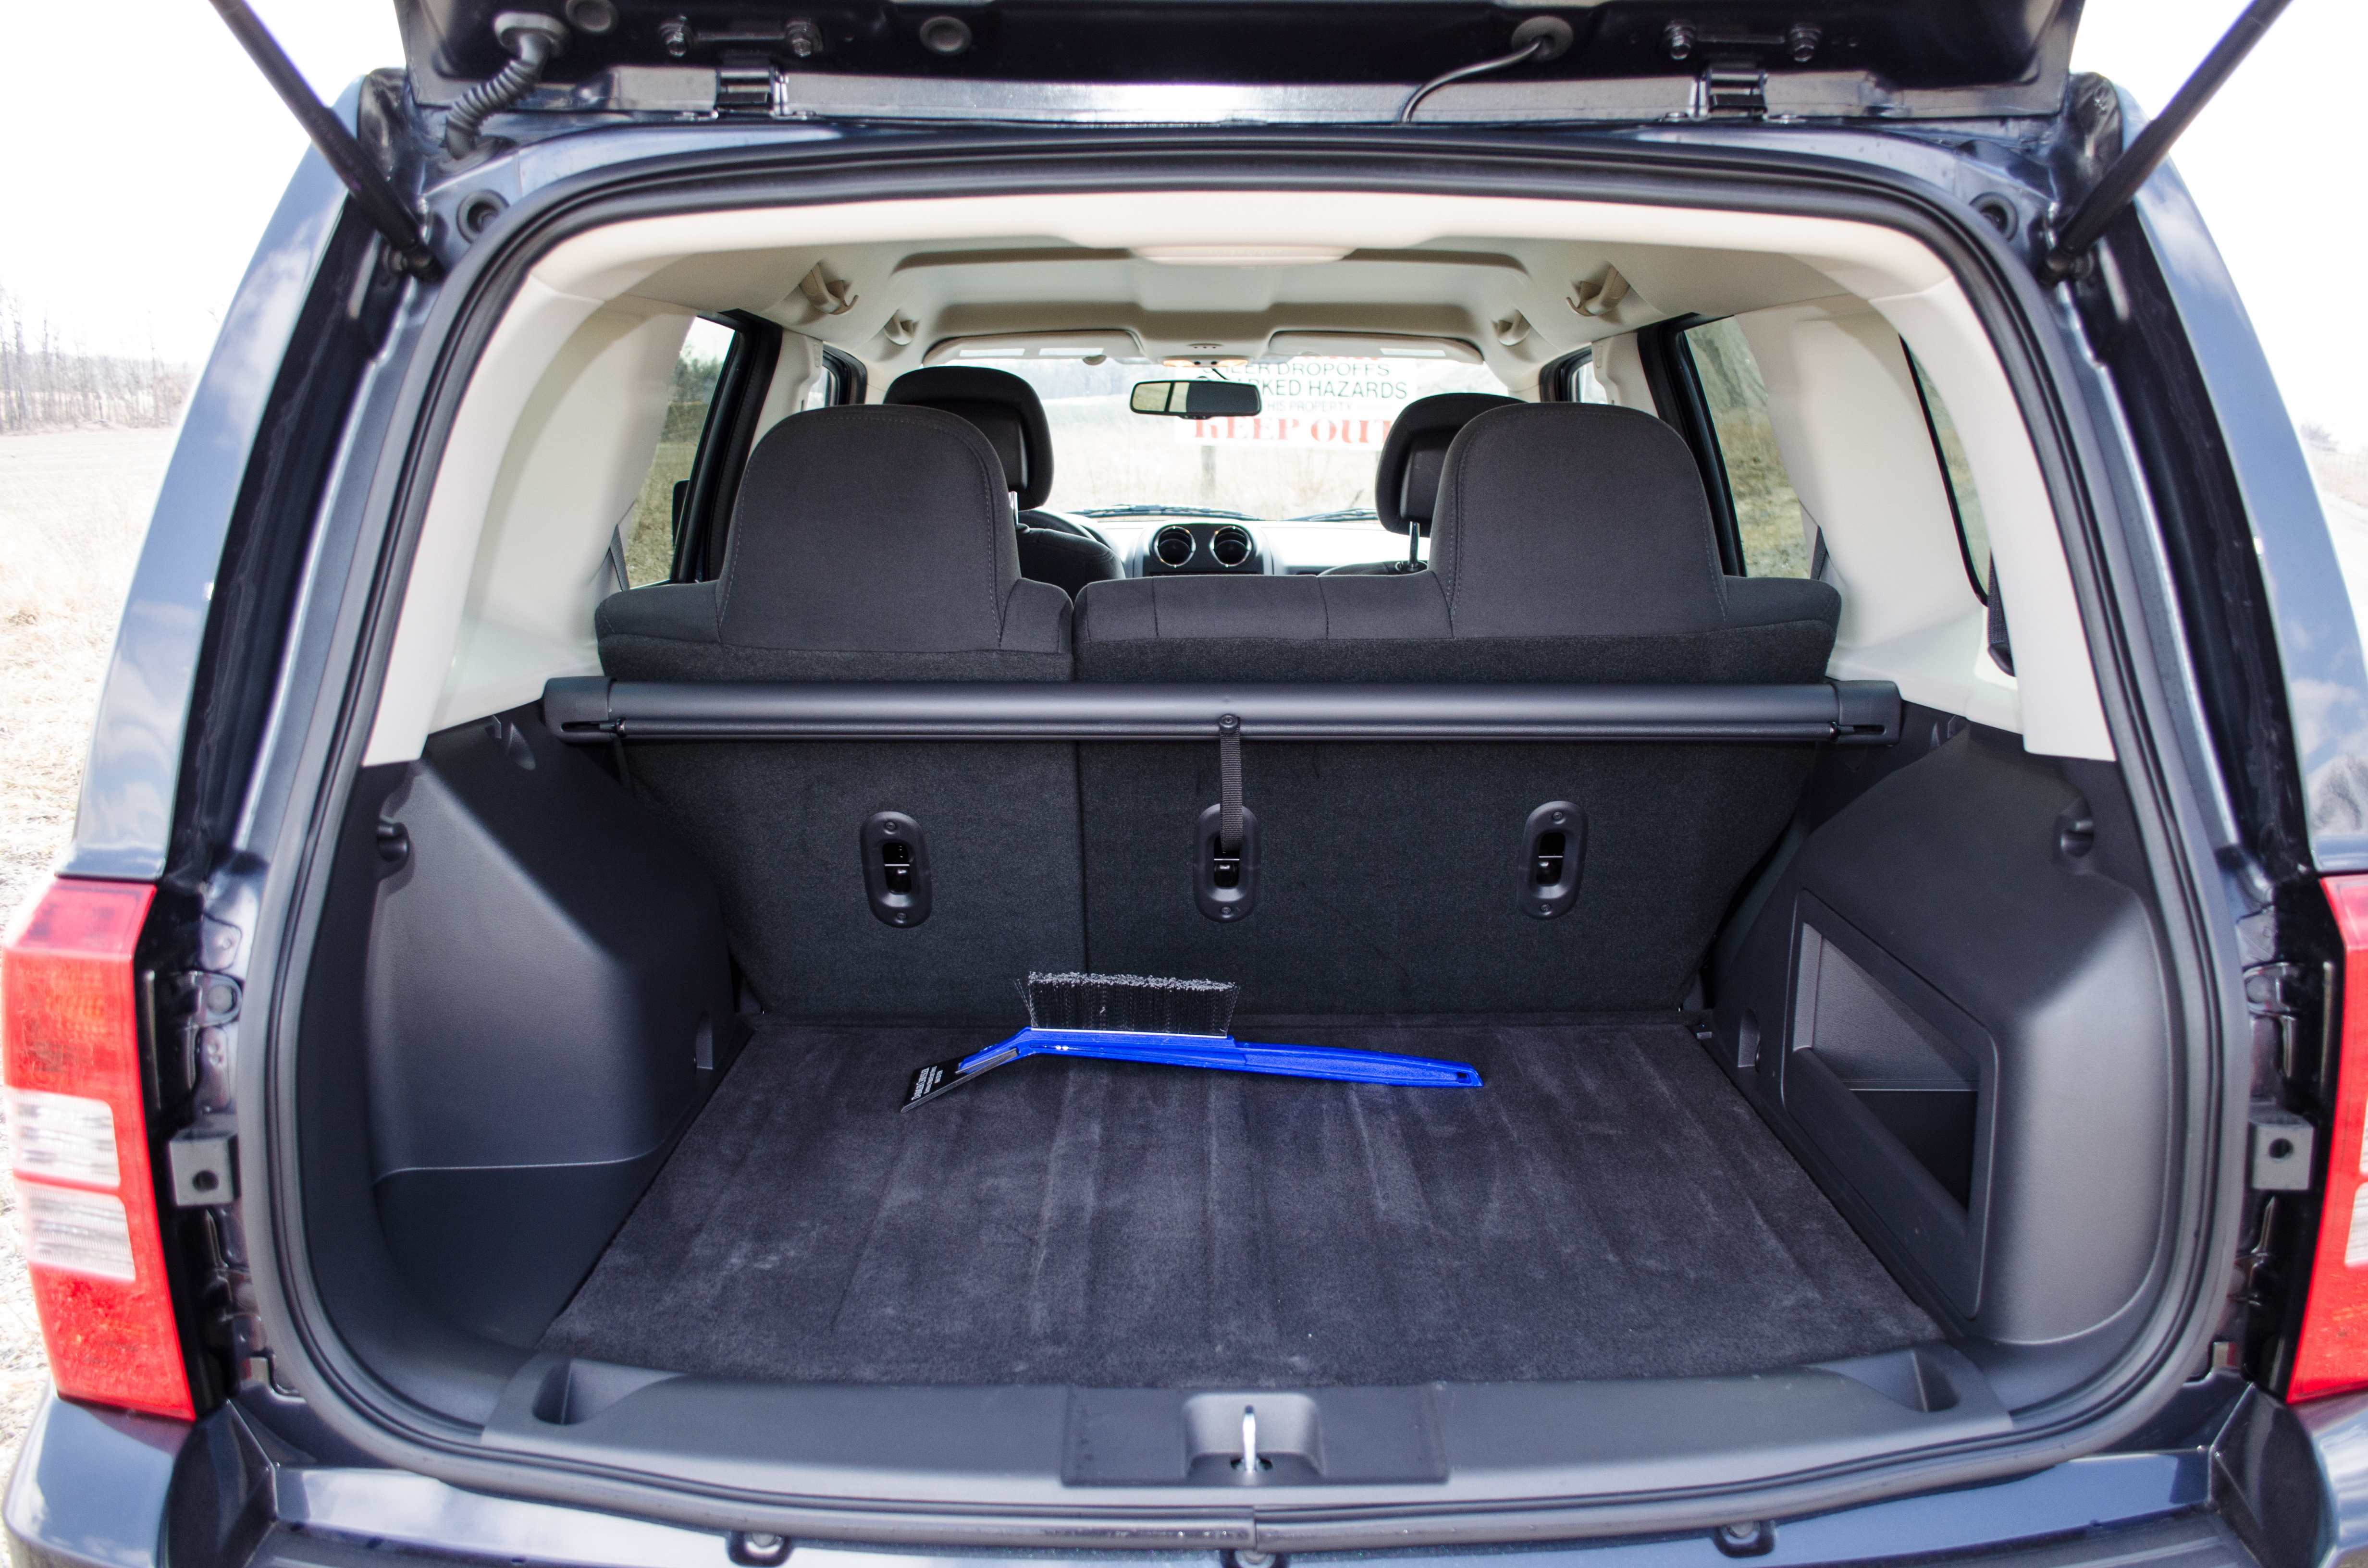 Which jeep has the most cargo space